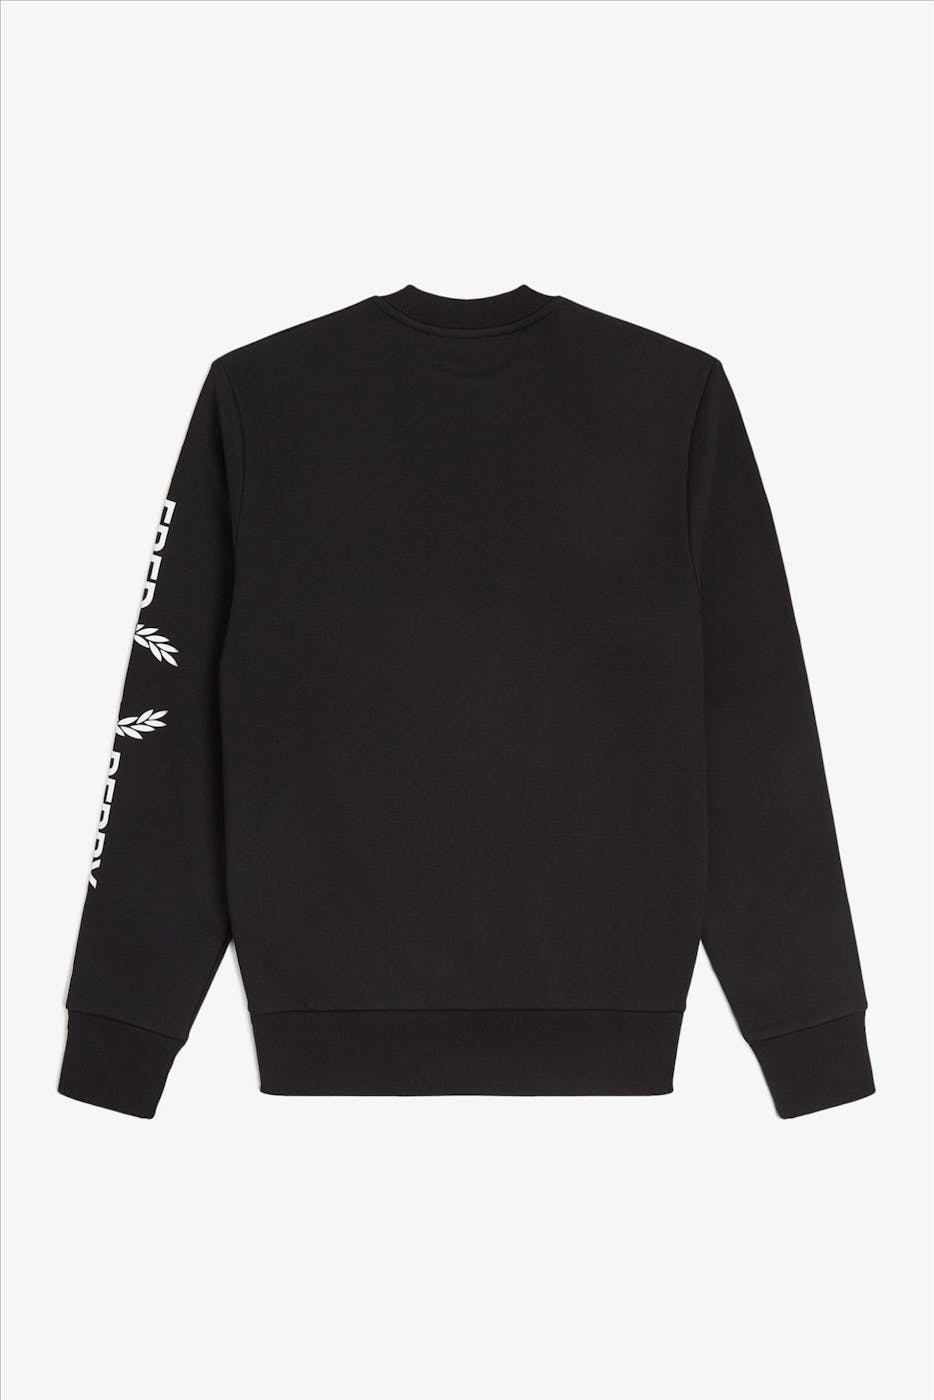 Fred Perry - Zwarte Sleeve Graphic sweater